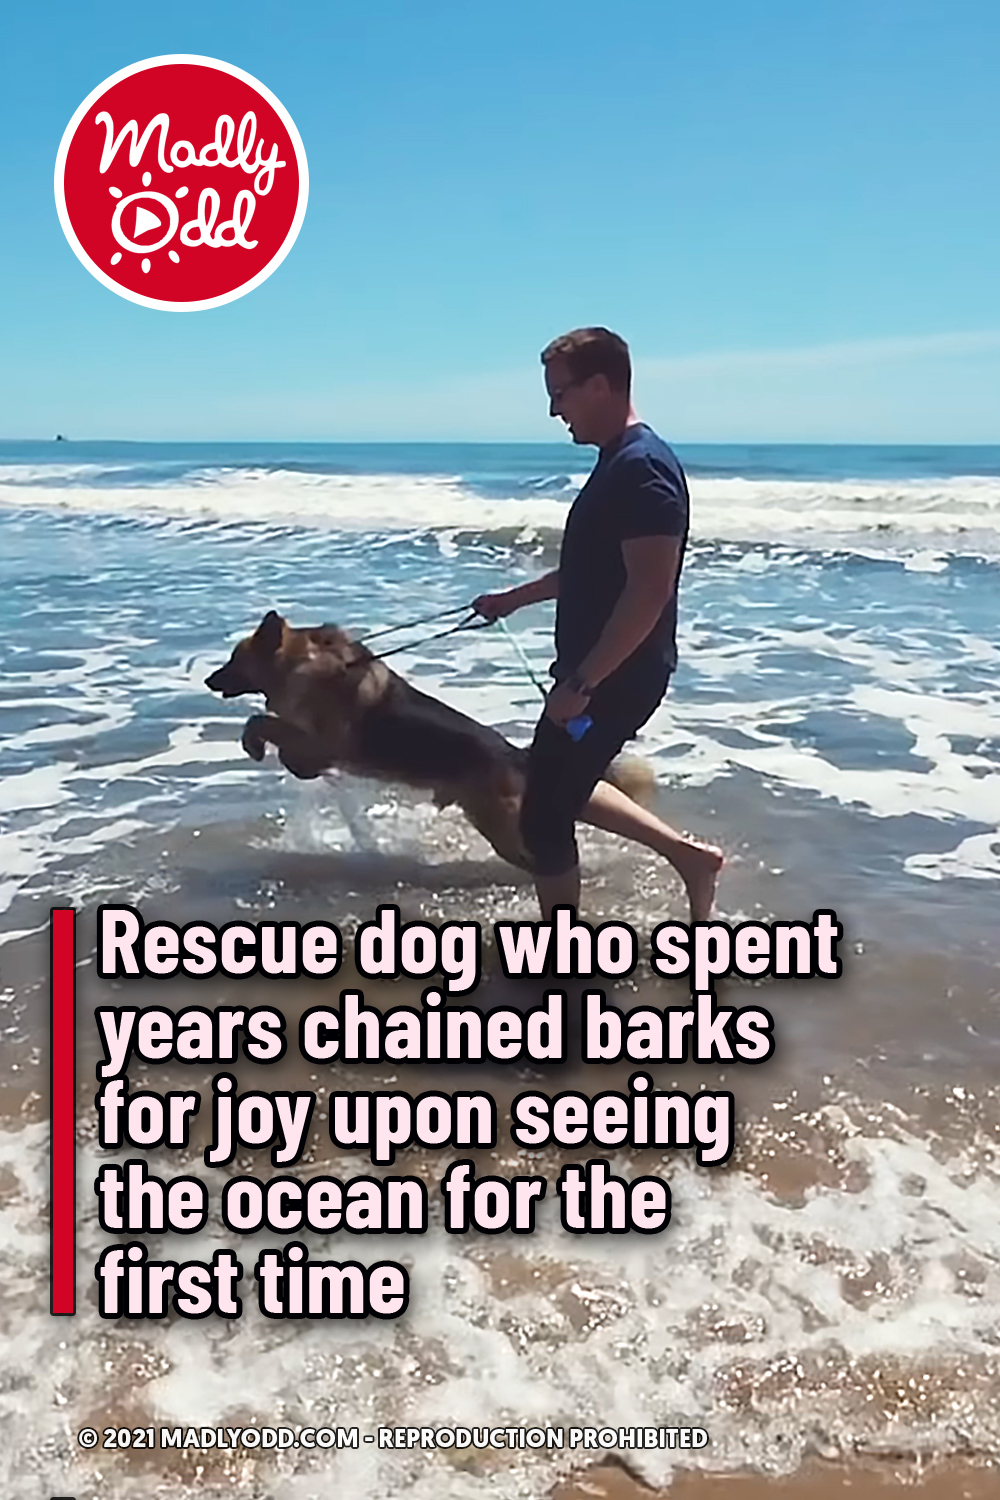 Rescue dog who spent years chained barks for joy upon seeing the ocean for the first time